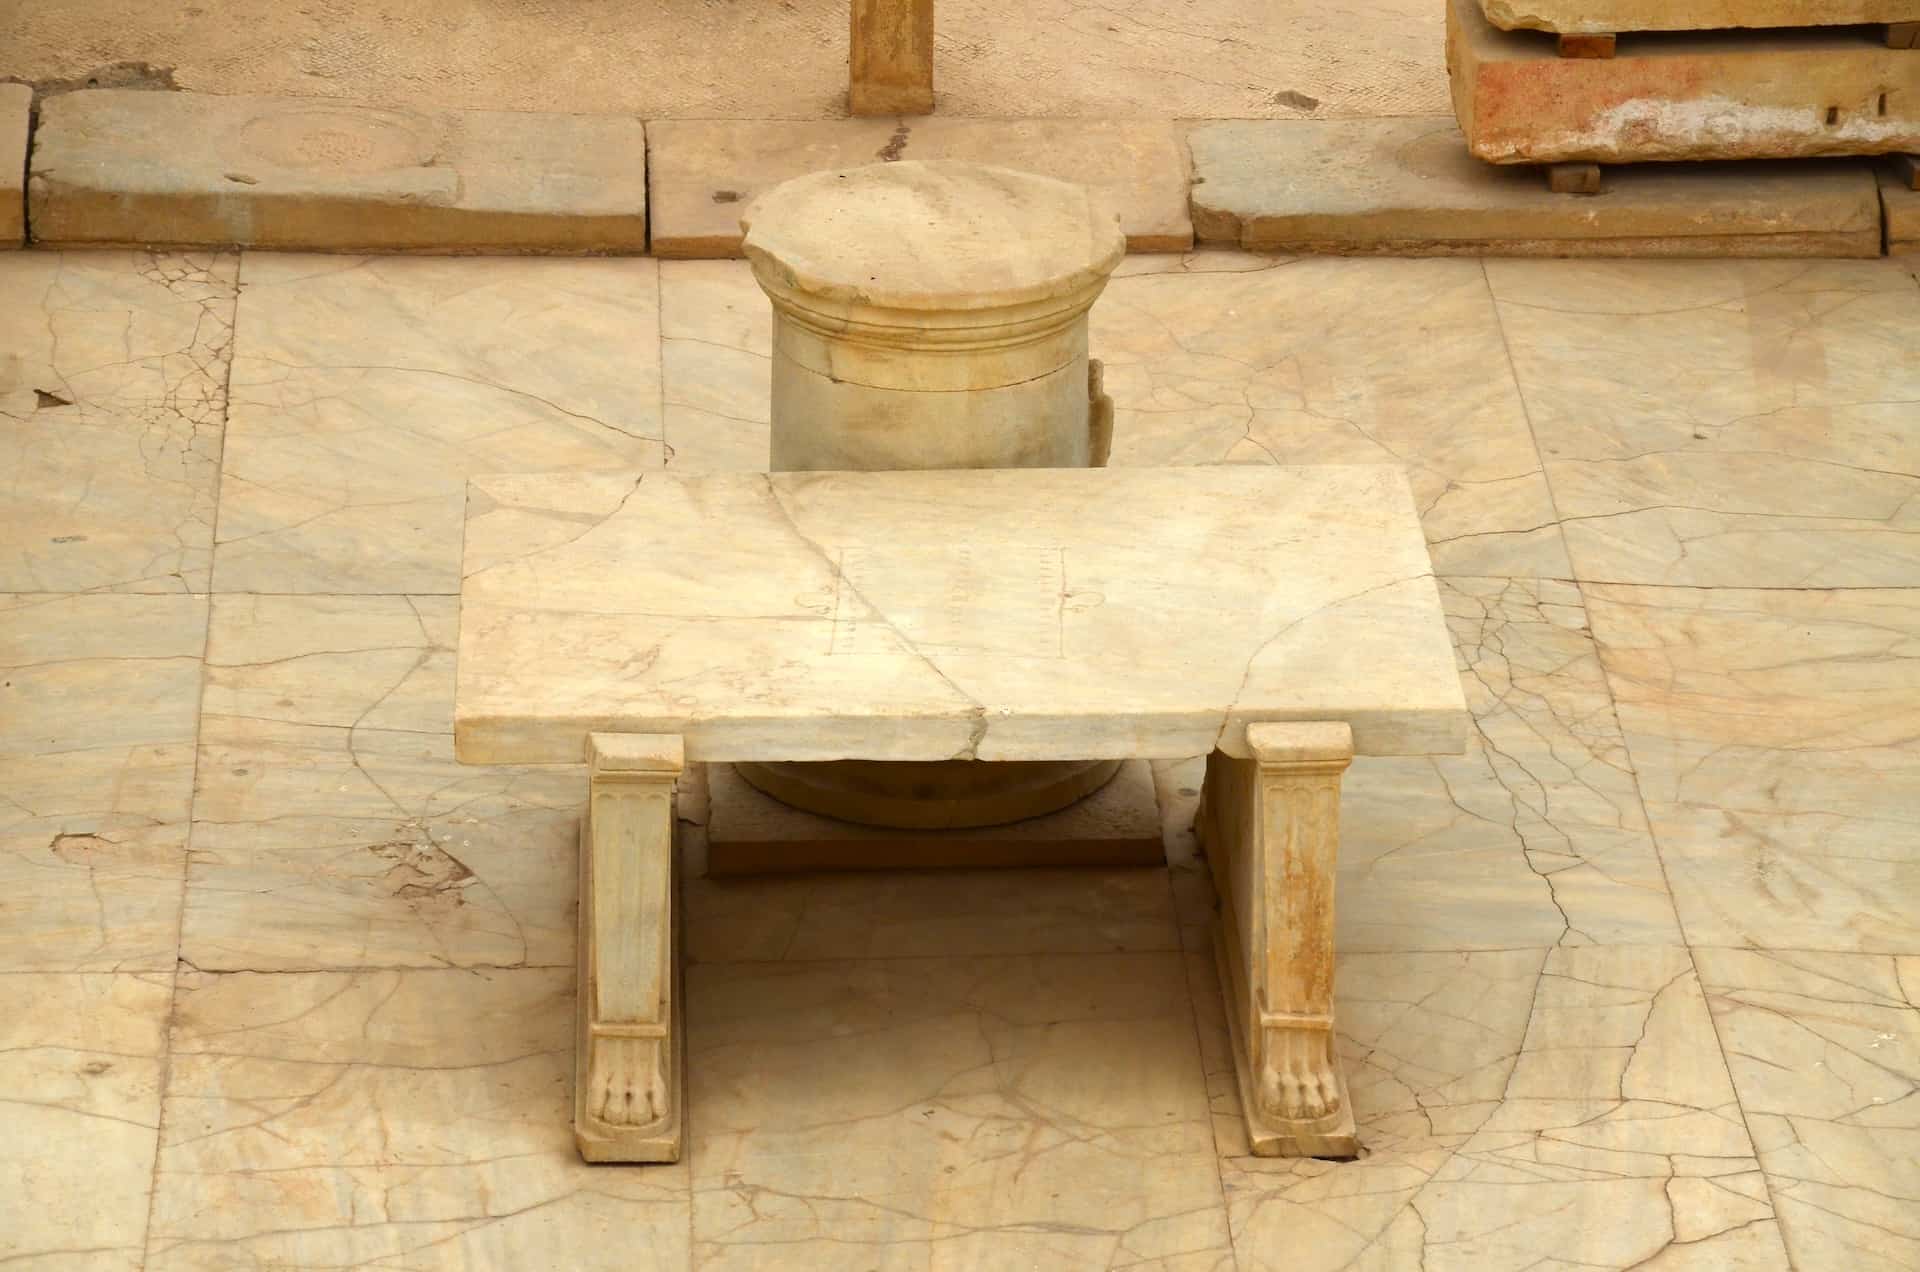 Table in the peristyle courtyard of Dwelling Unit 7 in the Terrace Houses at Ephesus